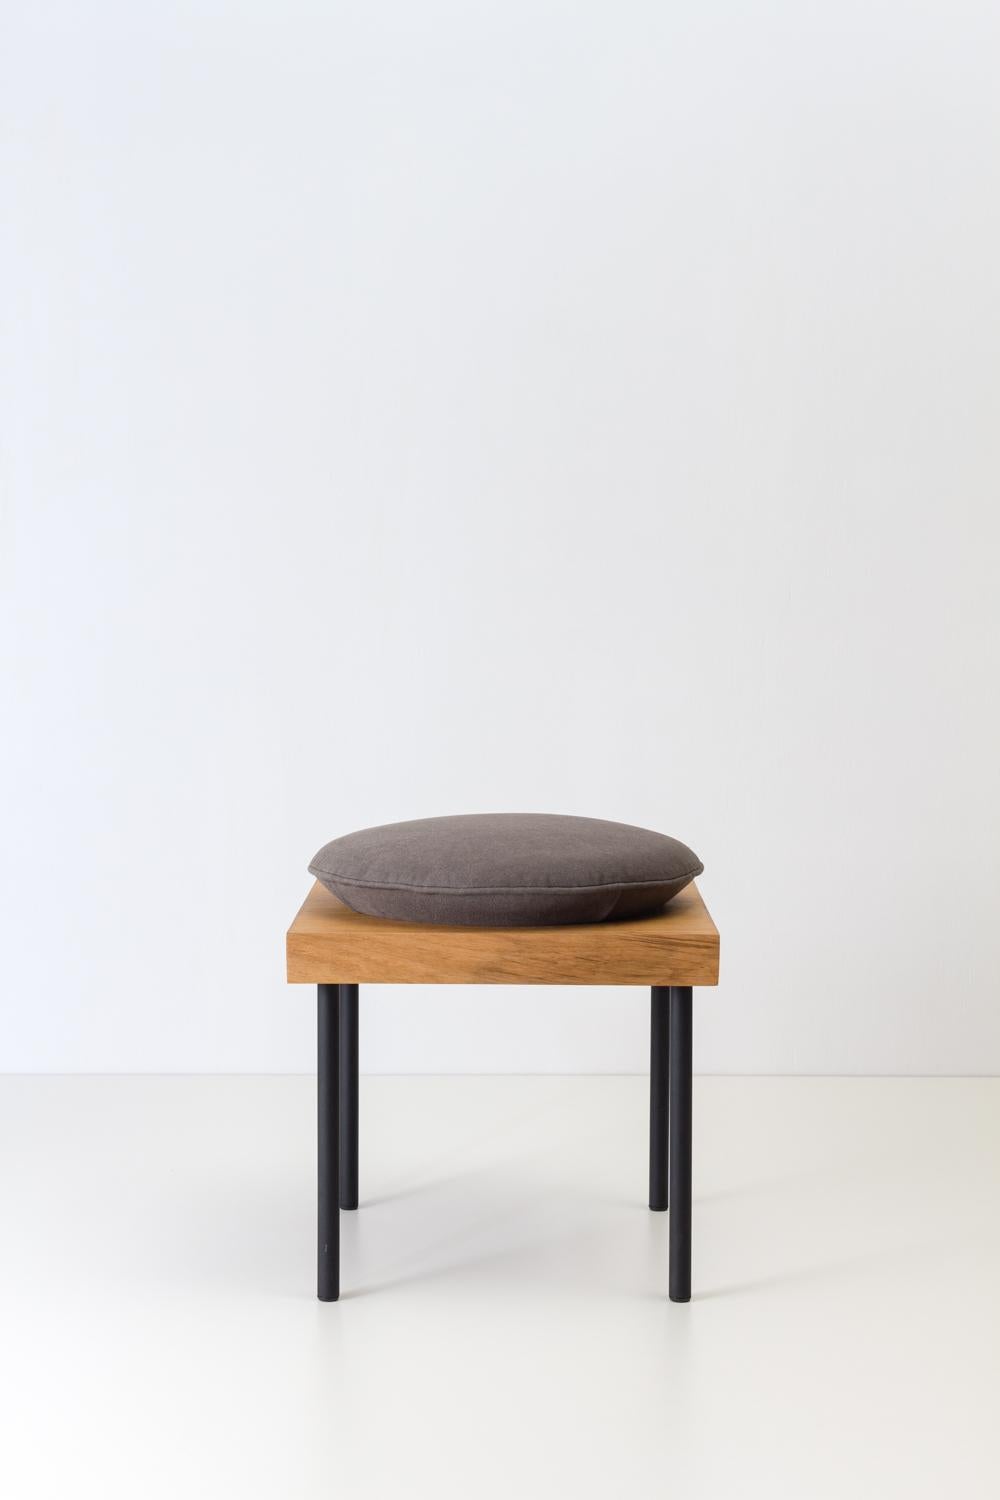 Tha Cauê Stool is a homage to Pico do Cauê (Cauê’s Peak), in Itabira. Pulverized mountain, crushed in billions of pieces, as described by Carlos Drummond de Andrade, one of the greatest Brazilian poets of all time. The design has inspiration from